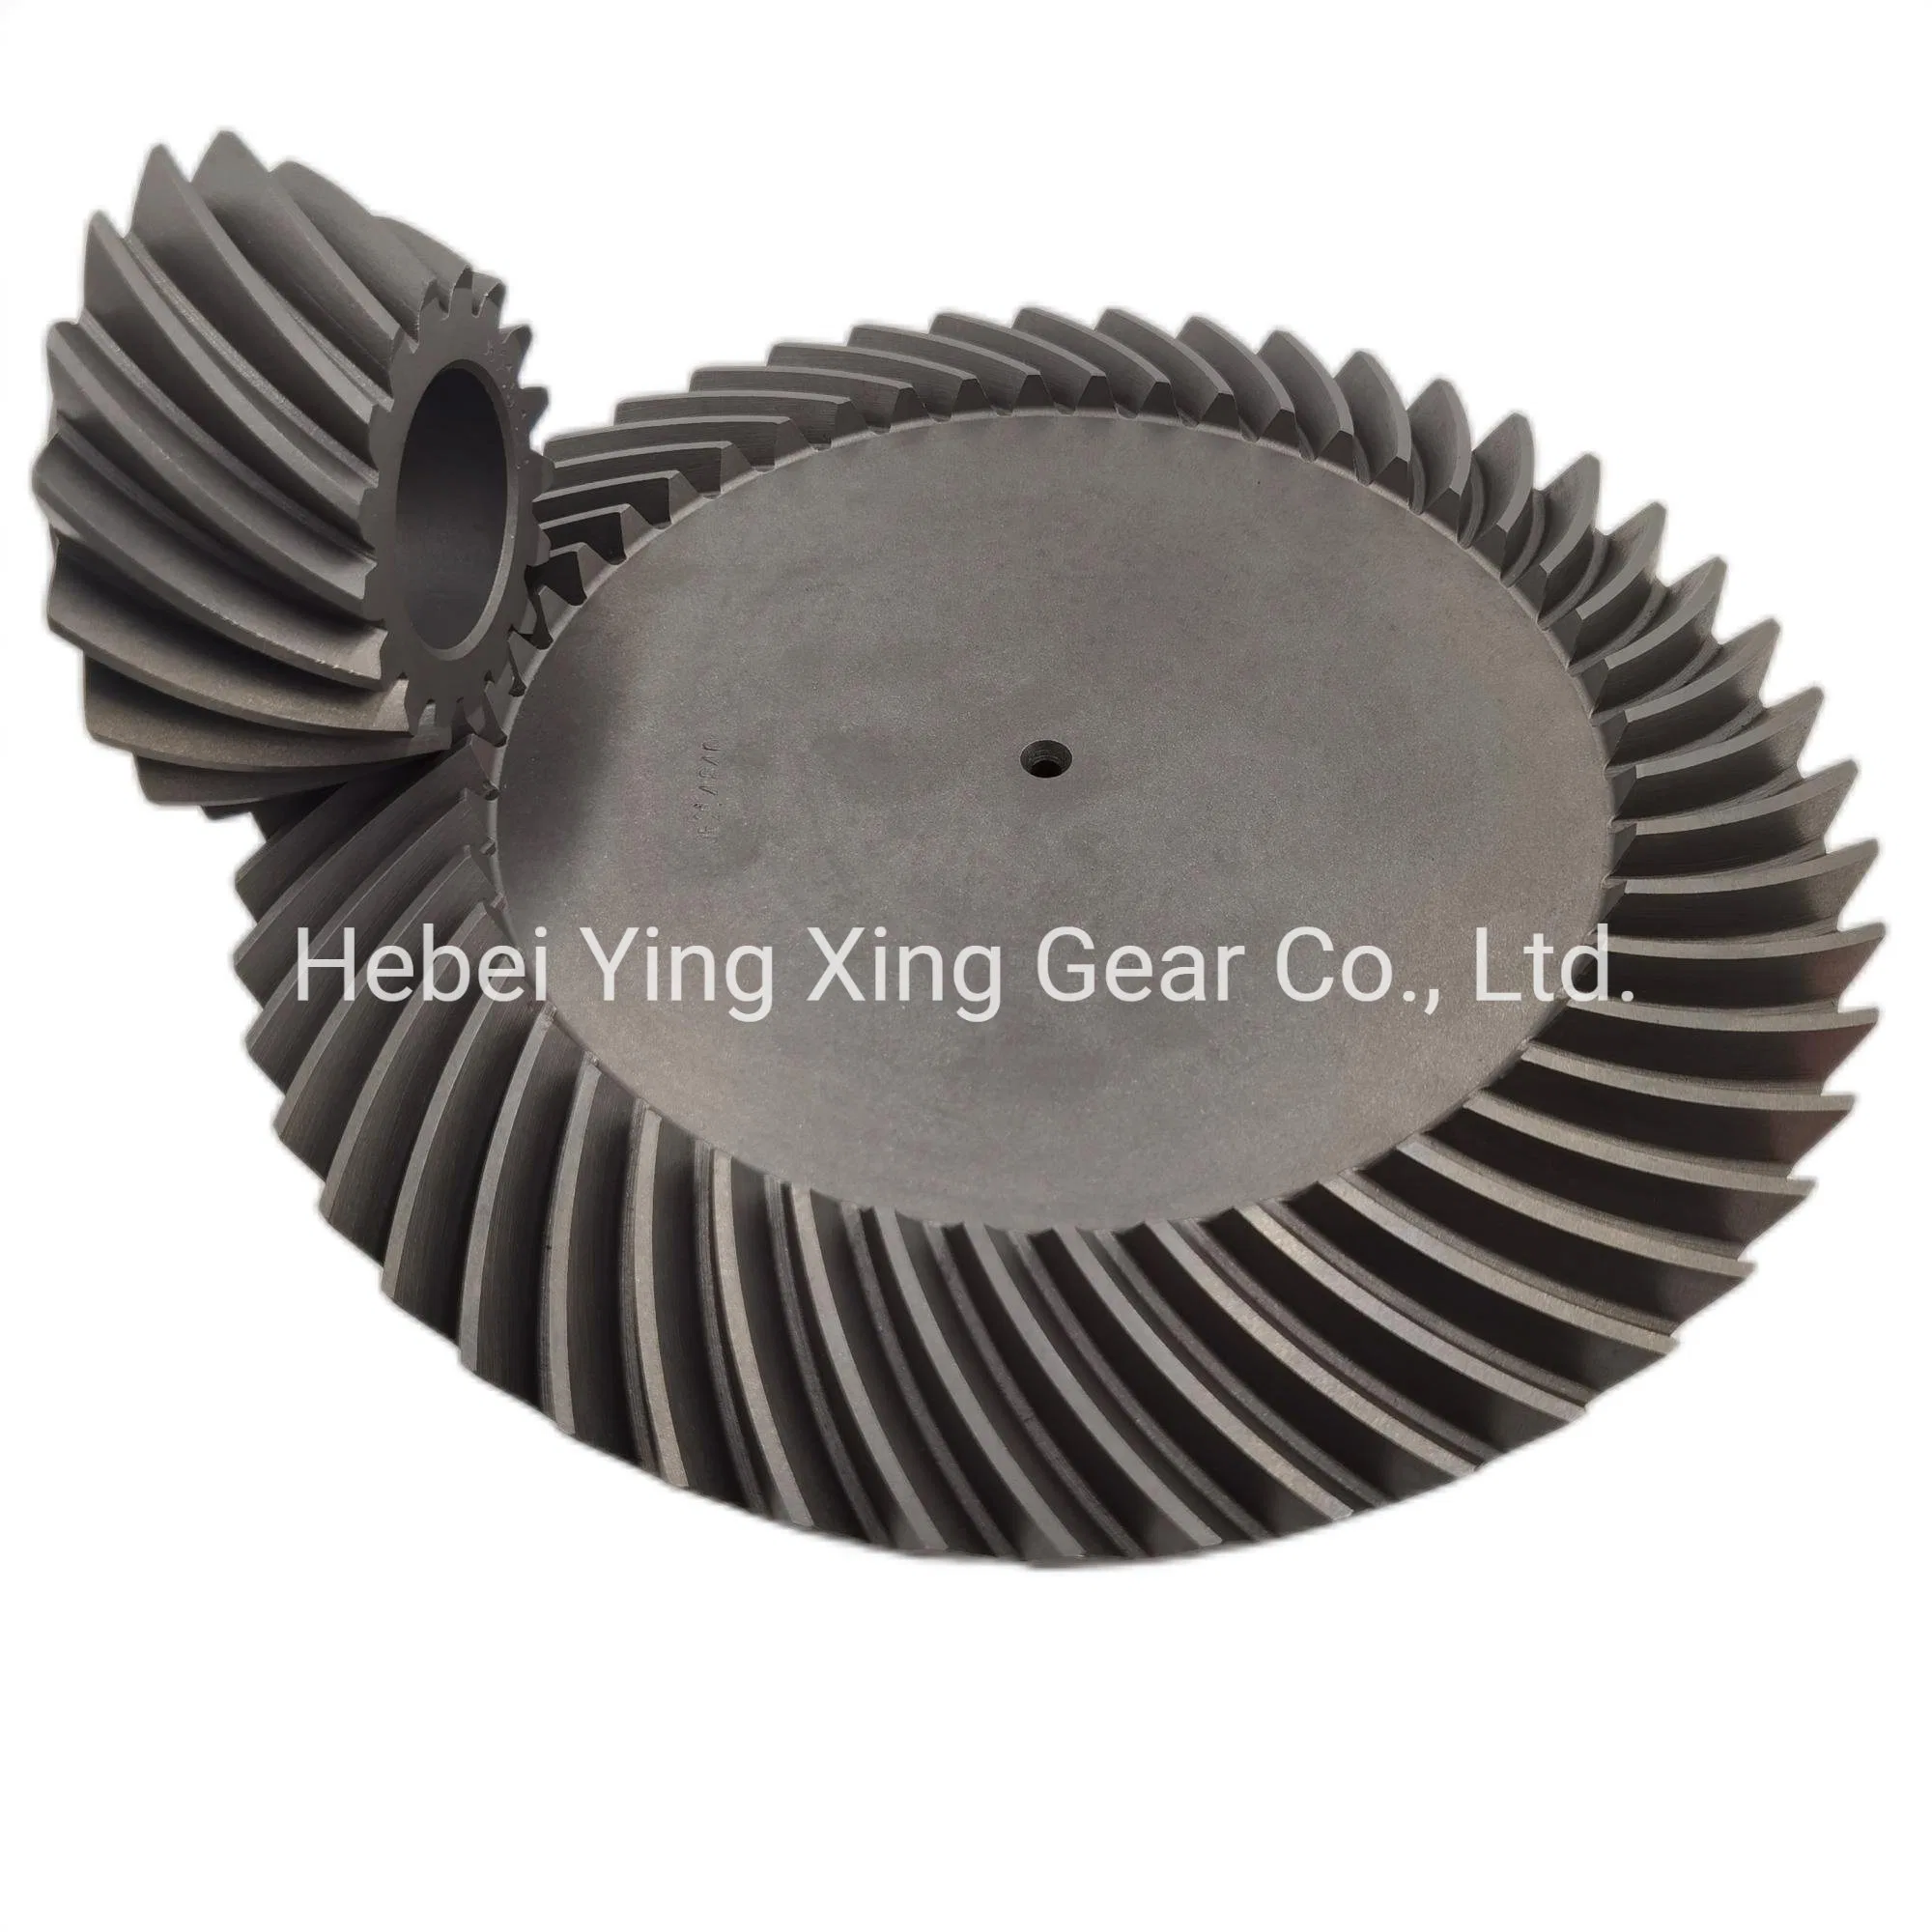 Module 6.9 and 17 Teeth Customized Gear for Oil Drilling Rig/ Construction Machinery/ Truck